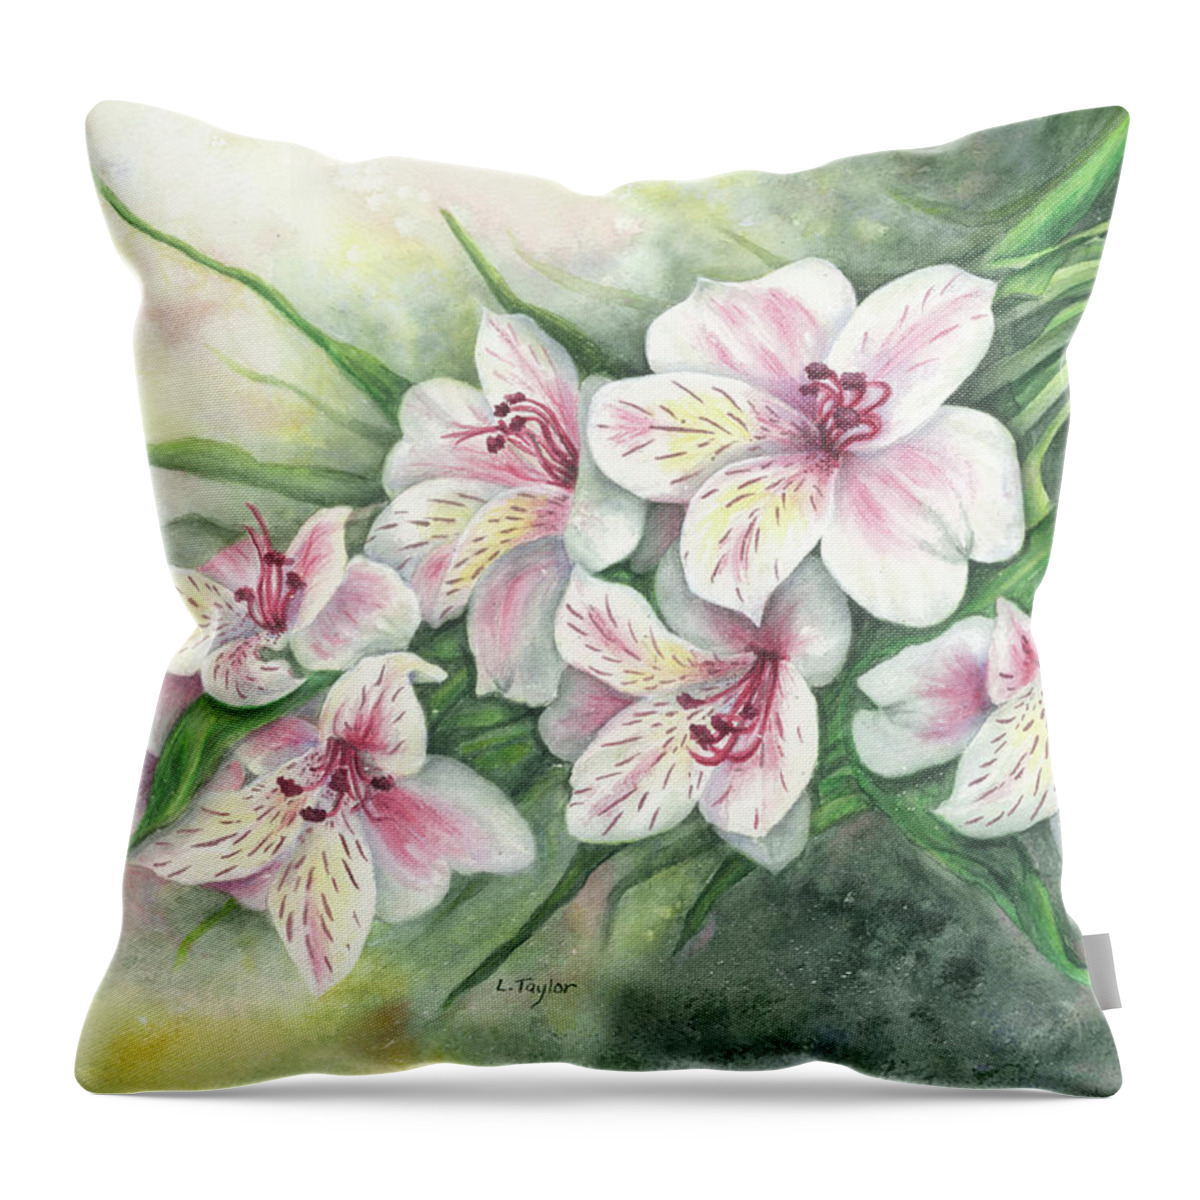 Floral Throw Pillow featuring the painting Peruvian Lilies by Lori Taylor